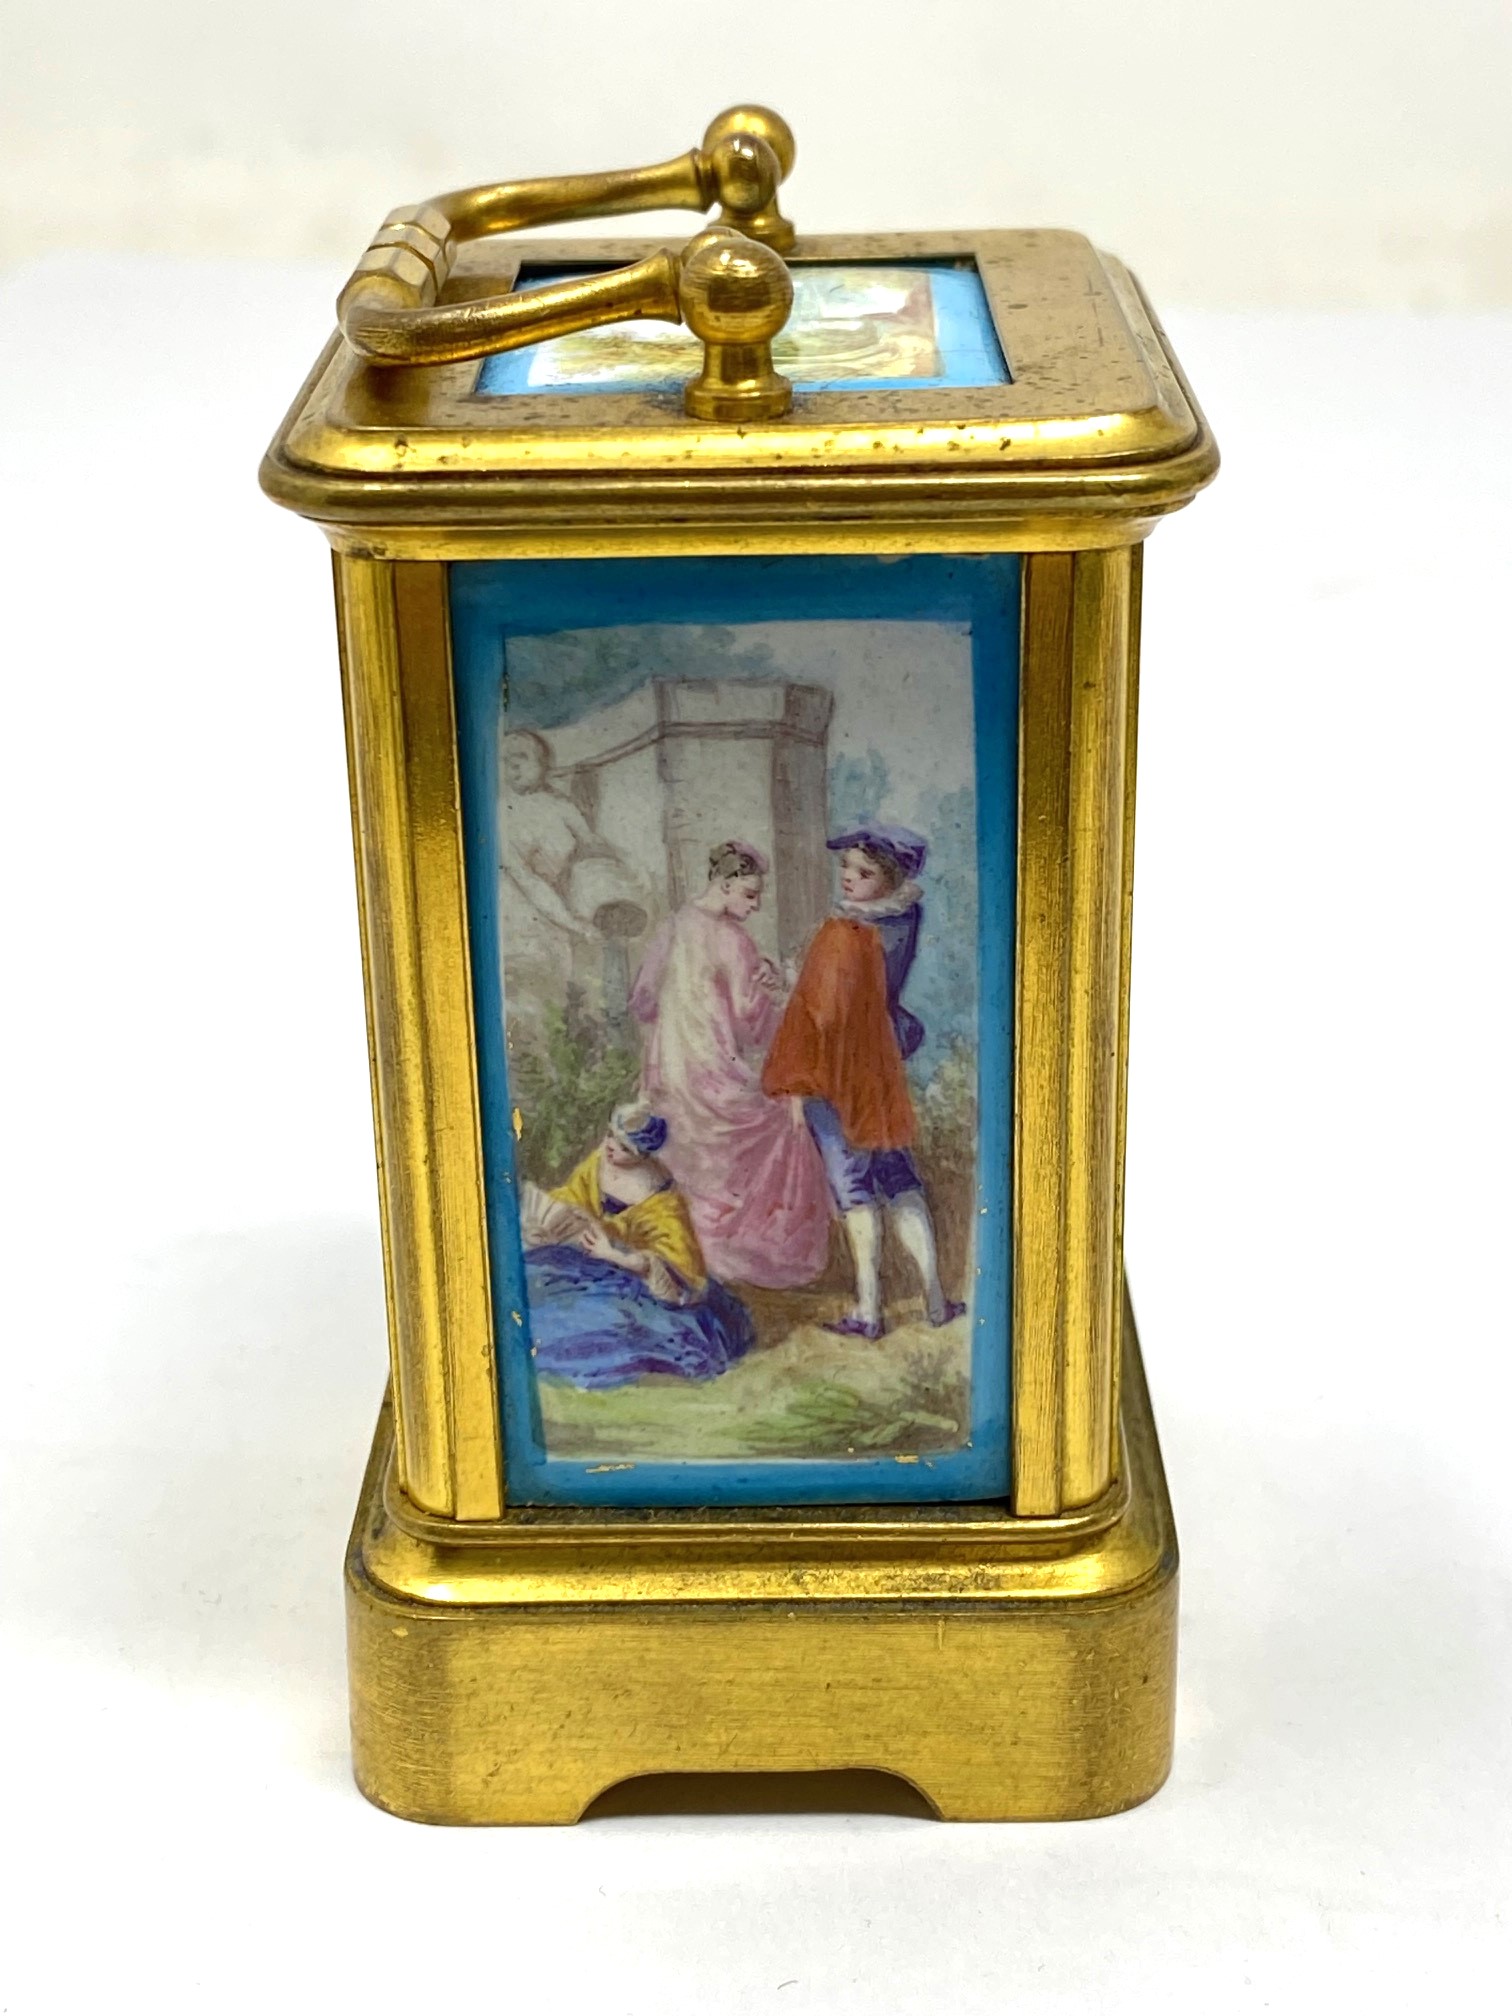 A FRENCH GILT-BRASS AND ENAMEL MINIATURE CARRIAGE CLOCK, PERHAPS J. DEJARDIN, PARIS, FOR RETAIL BY - Image 5 of 8